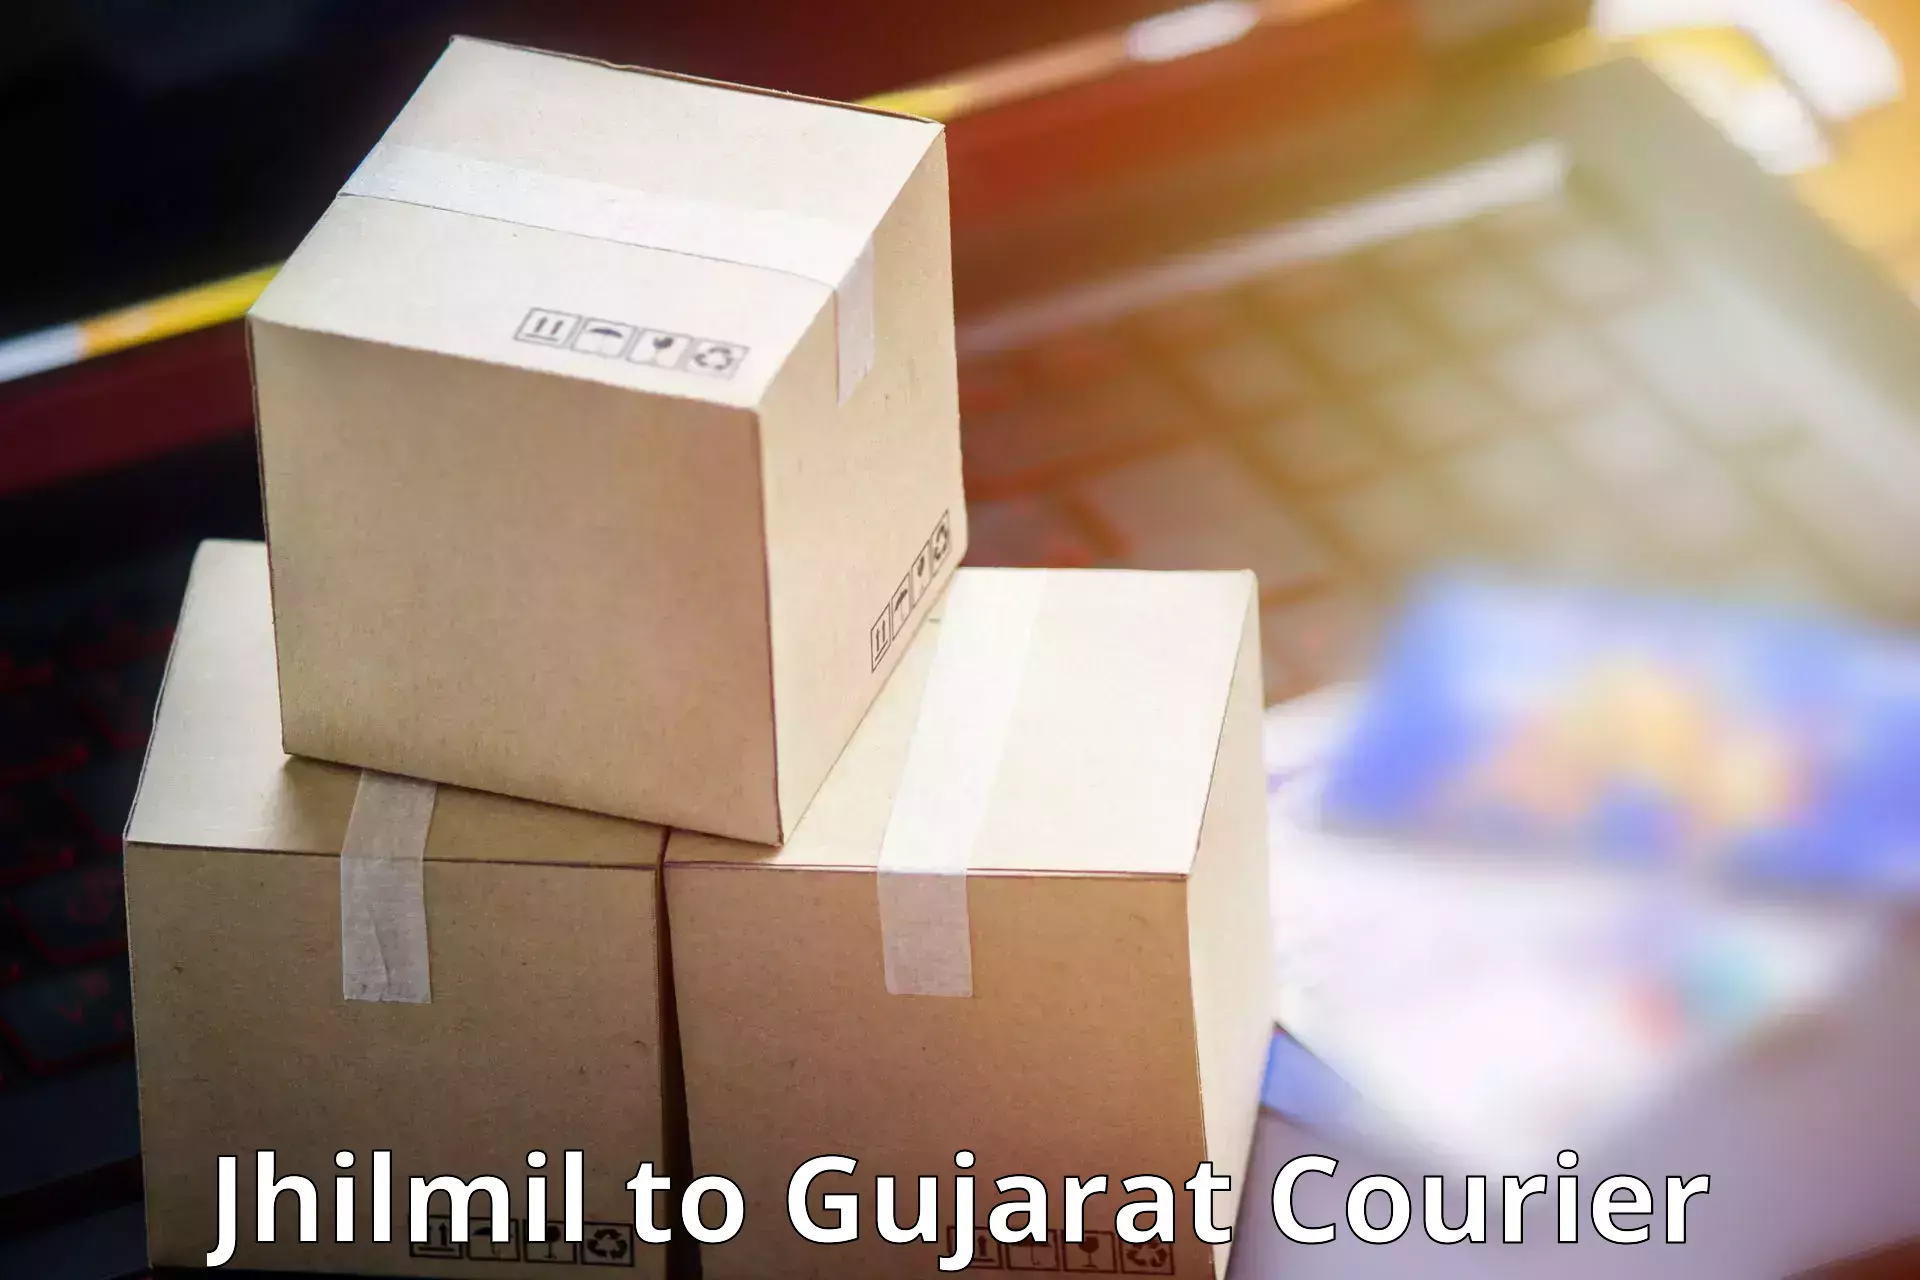 Quality courier partnerships Jhilmil to Vatadara